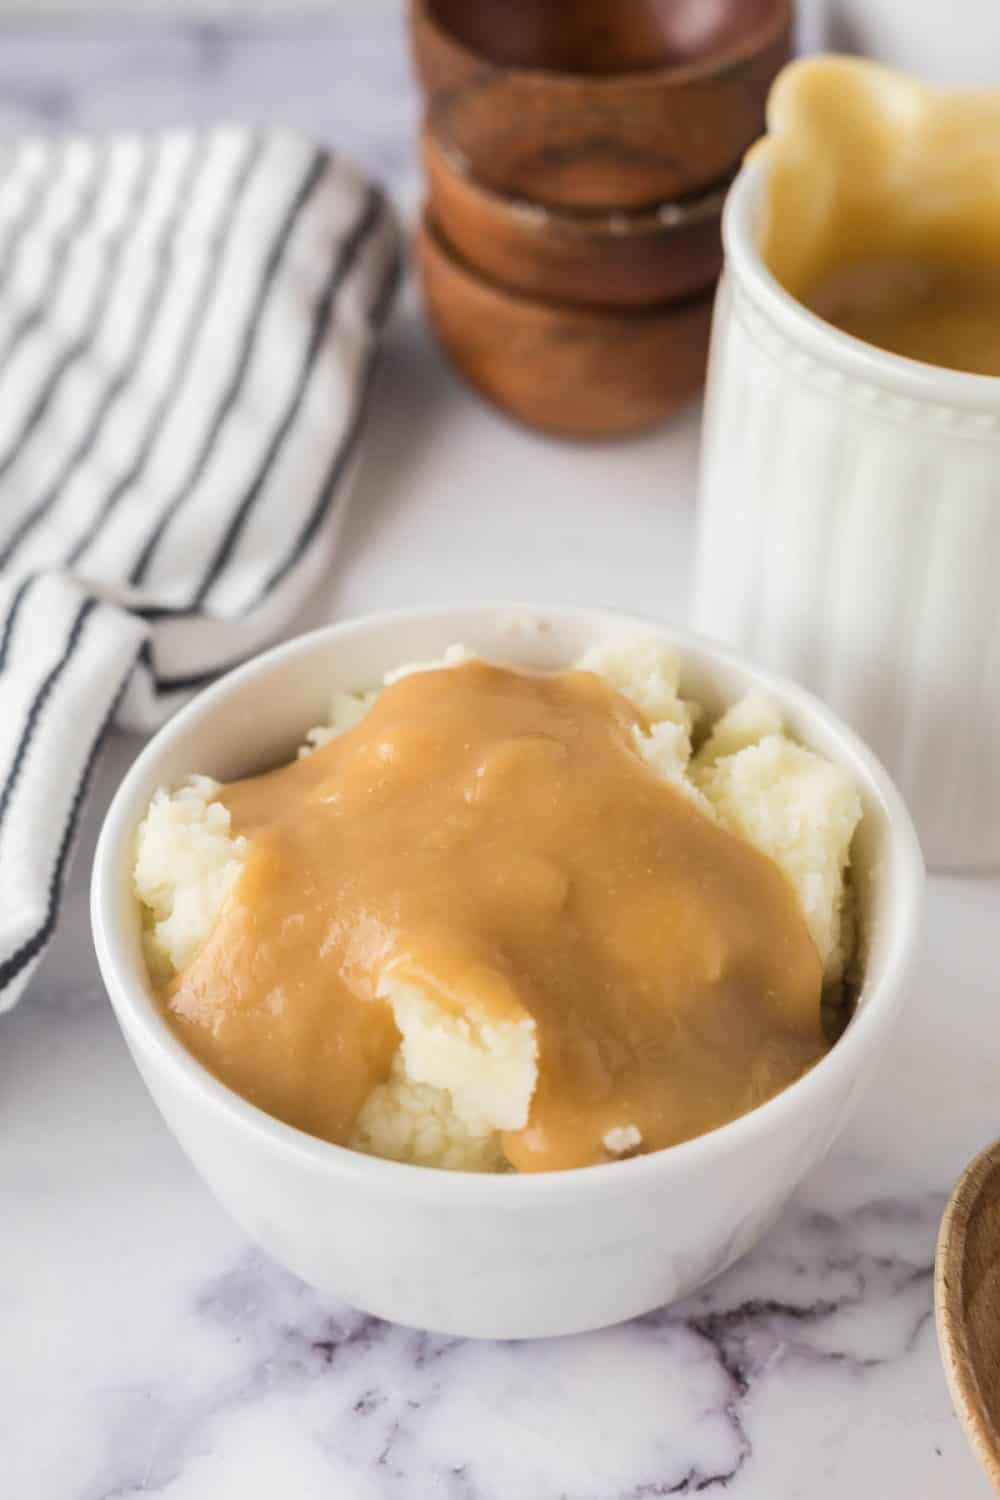 mashed potatoes and brown gravy in a white bowl